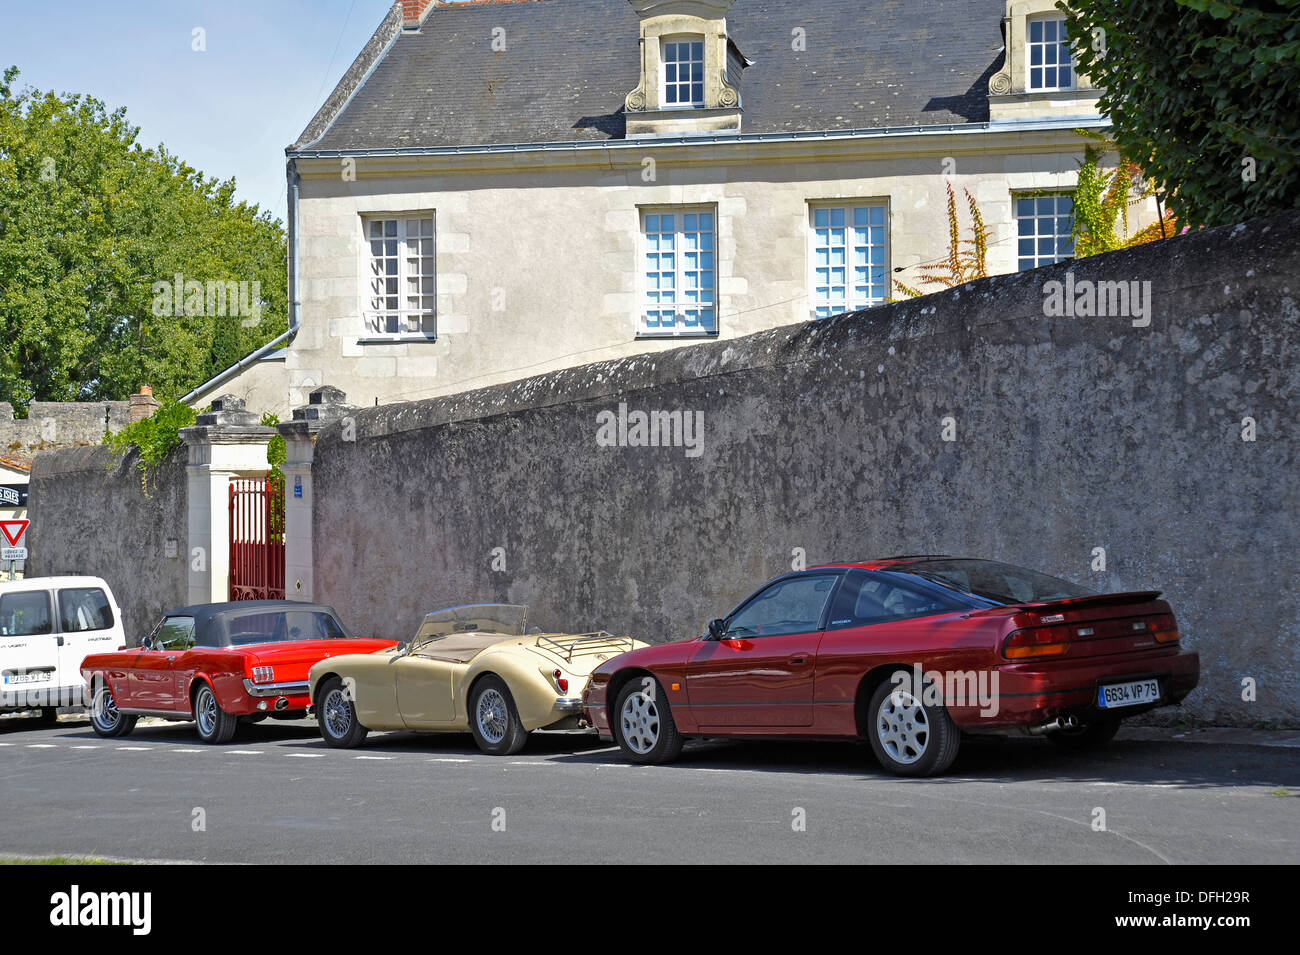 Ford mustang,MG1600,Nissan 200sx s13. Stock Photo